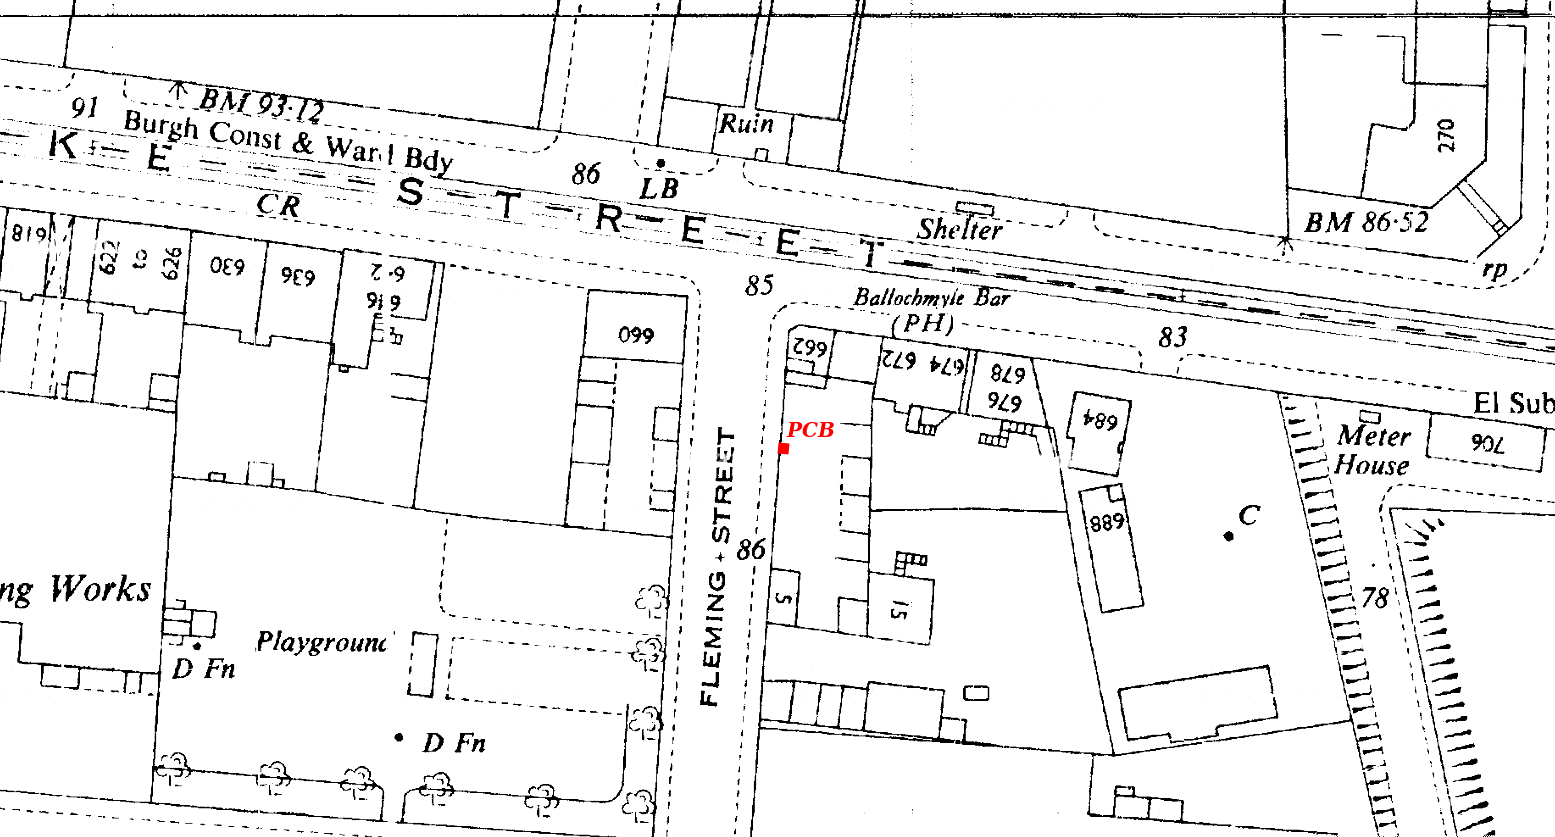 C31--Glasgow Mark 2-Fleming St at Duke St--1951-1954 OS Map Extract 1-1250 (Site in red).png